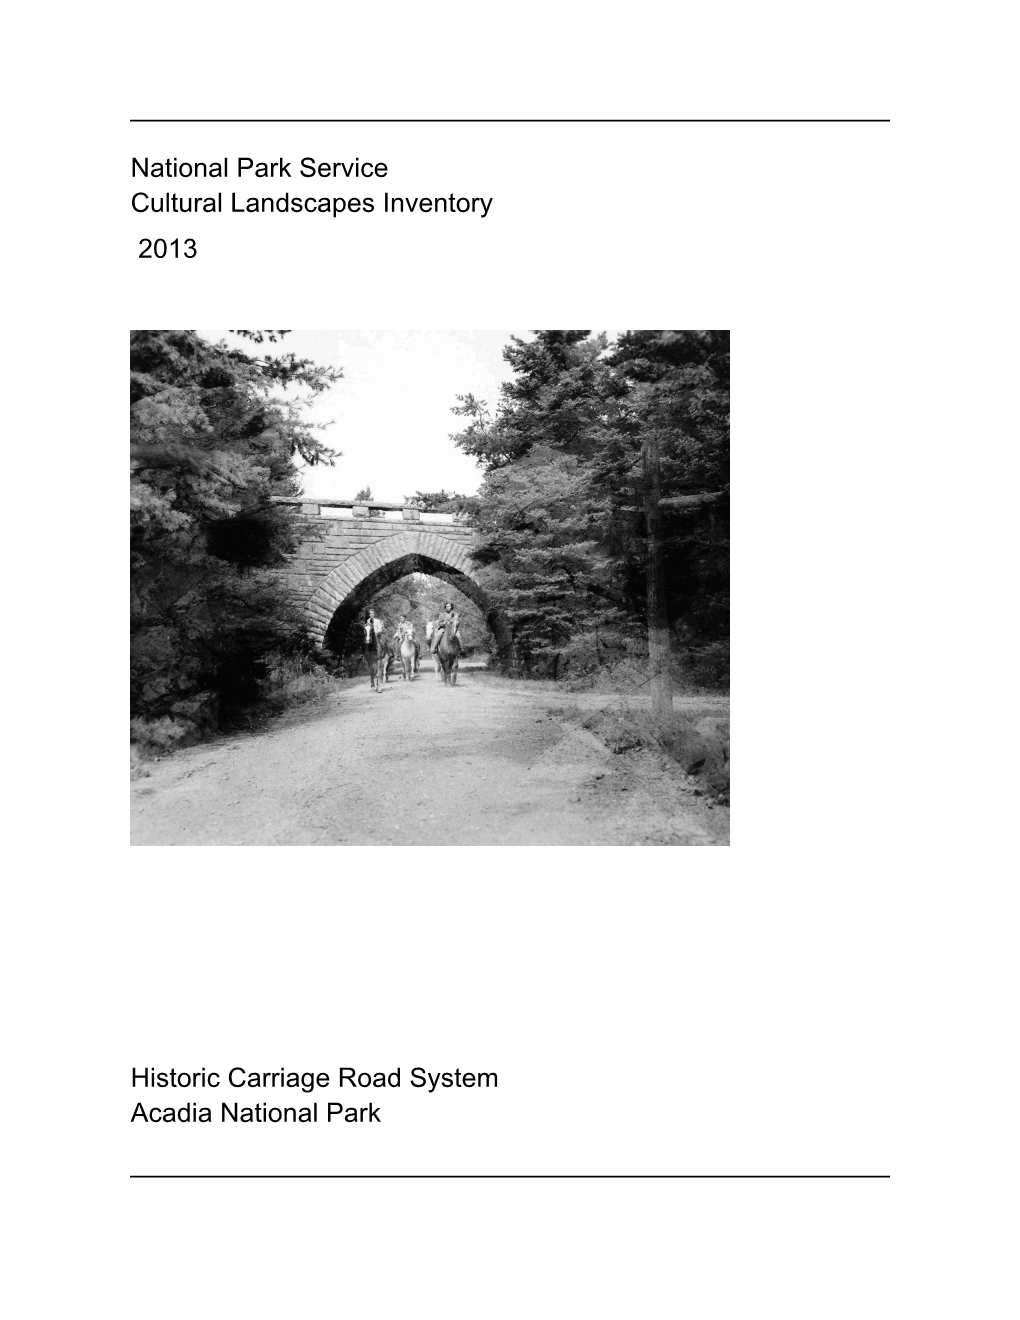 National Park Service Cultural Landscapes Inventory Historic Carriage Road System Acadia National Park 2013